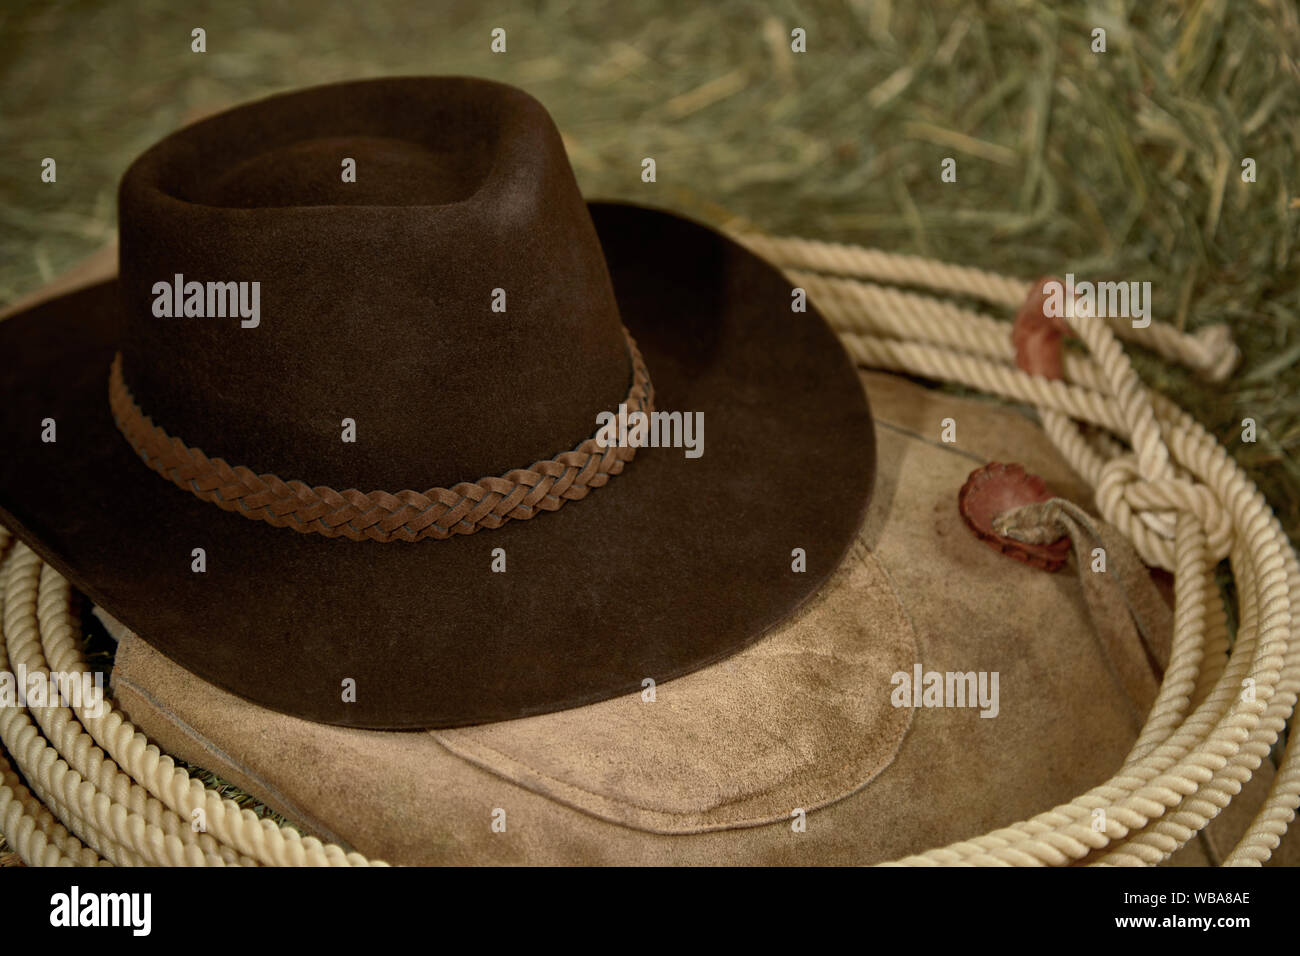 Western Cowboy hat with leather chaps and a roper's rope on hay in a barn Stock Photo